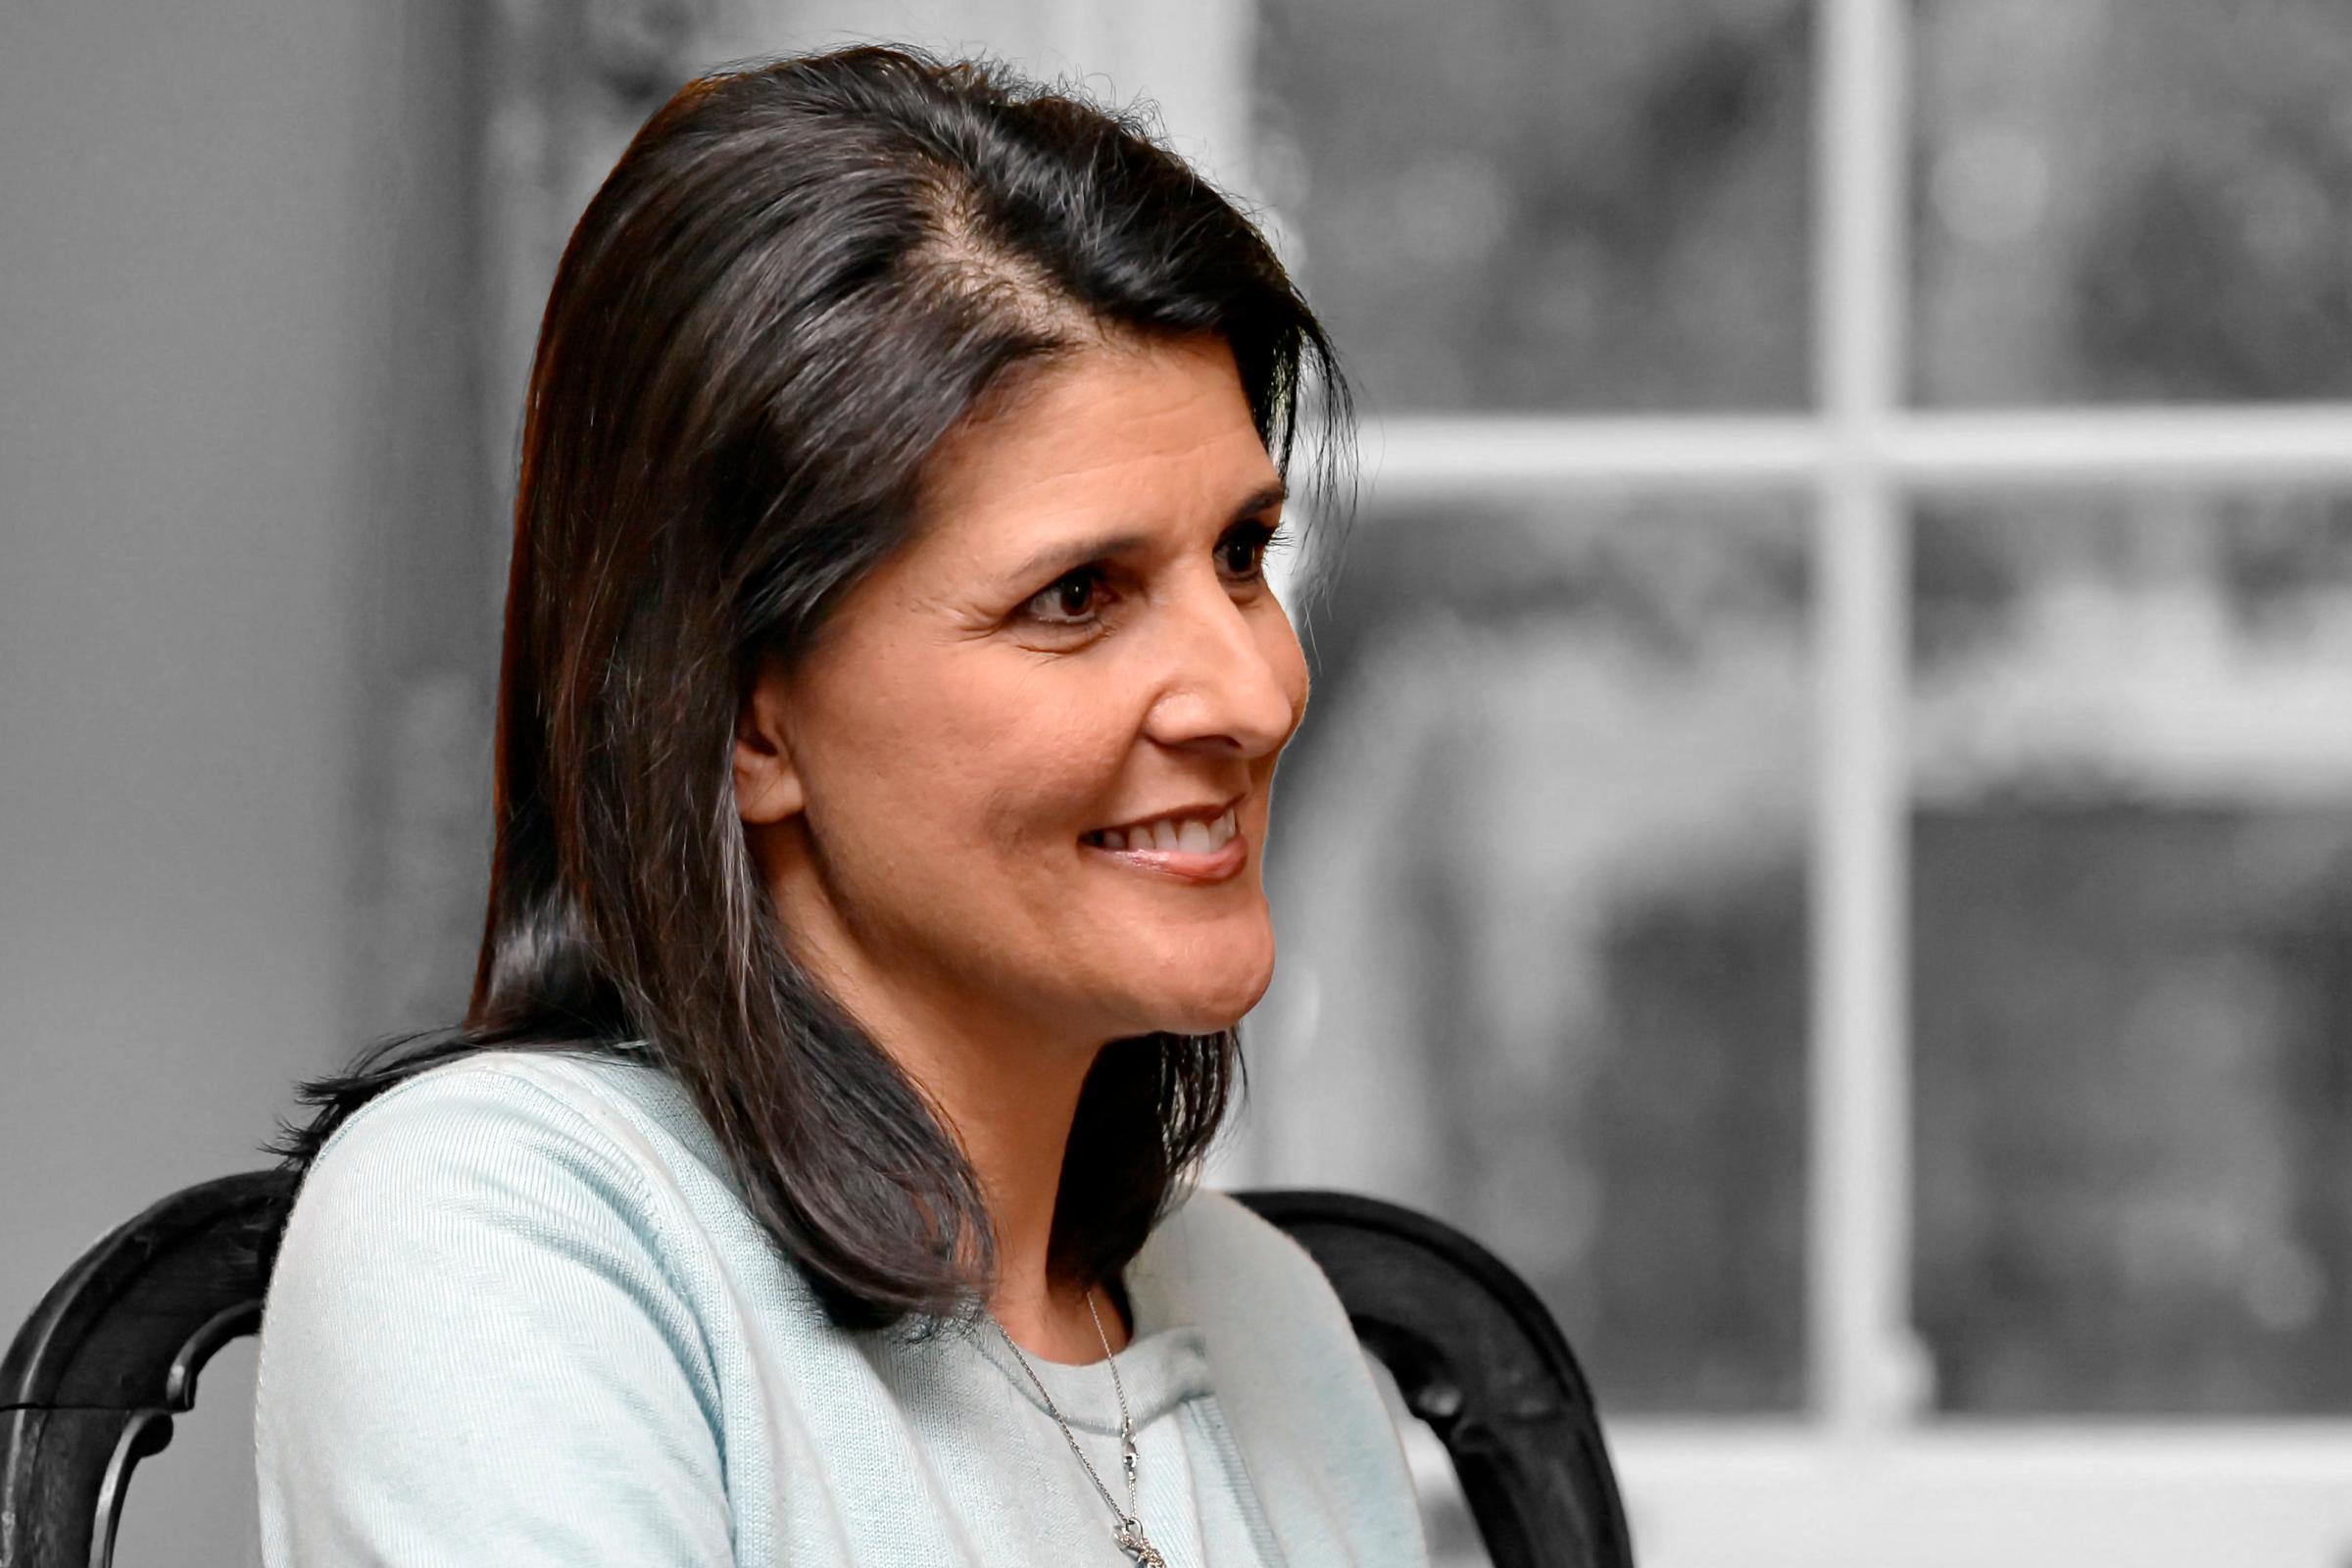 Nikki Haley The South Carolina Governor, a Republican, drew praise for her handling of the Charleston church shooting and the lowering of the Confederate flag. She'll be in the spotlight again next year as the first Southern presidential primary takes place in her backyard.